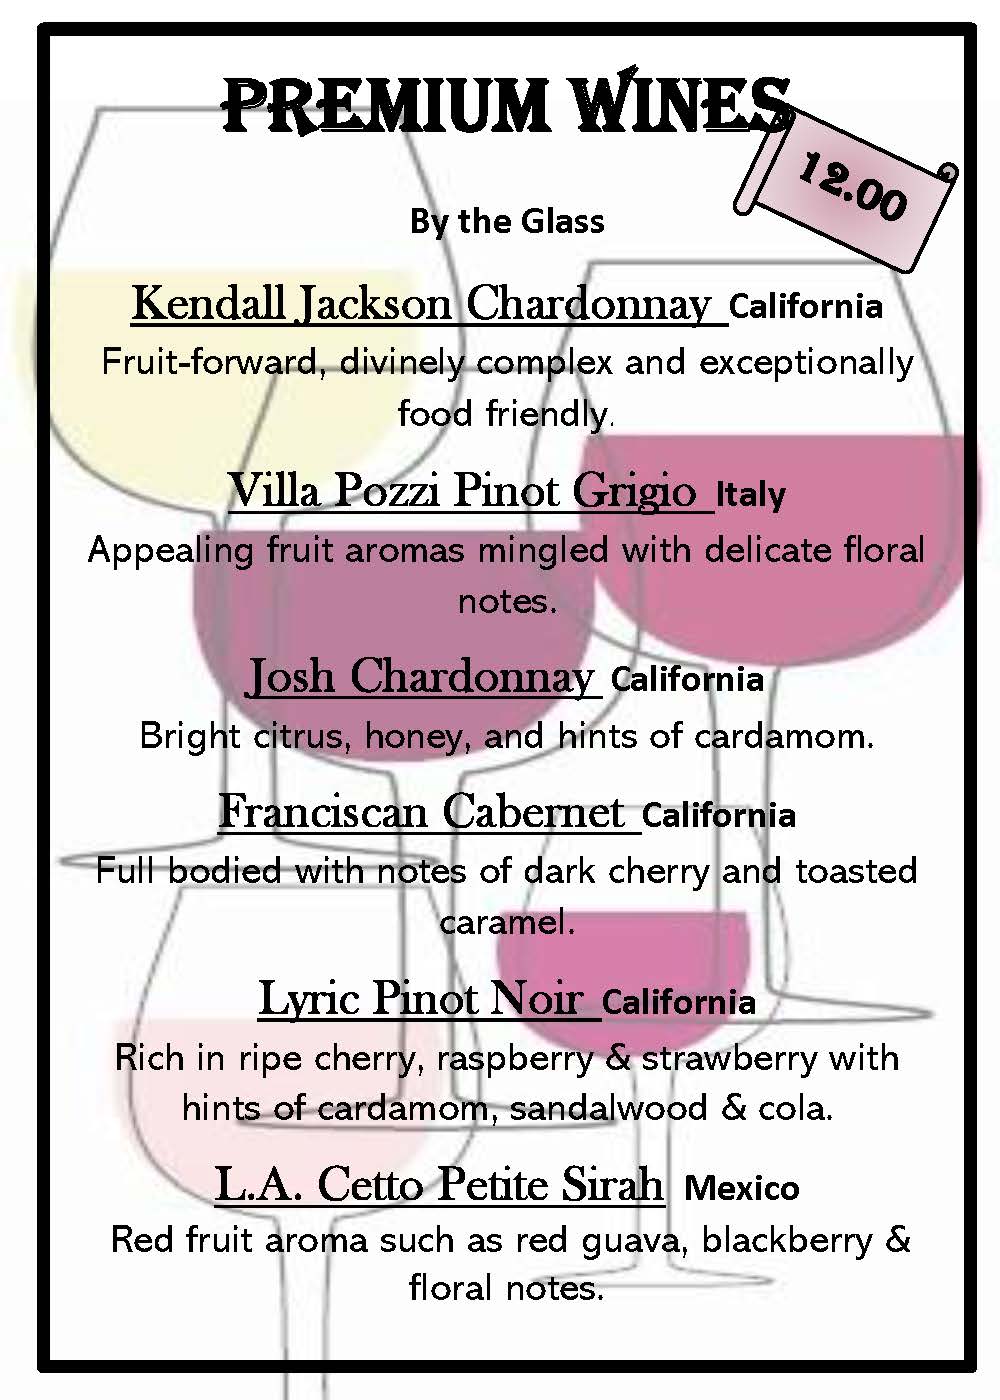 A flyer for a wine tasting.